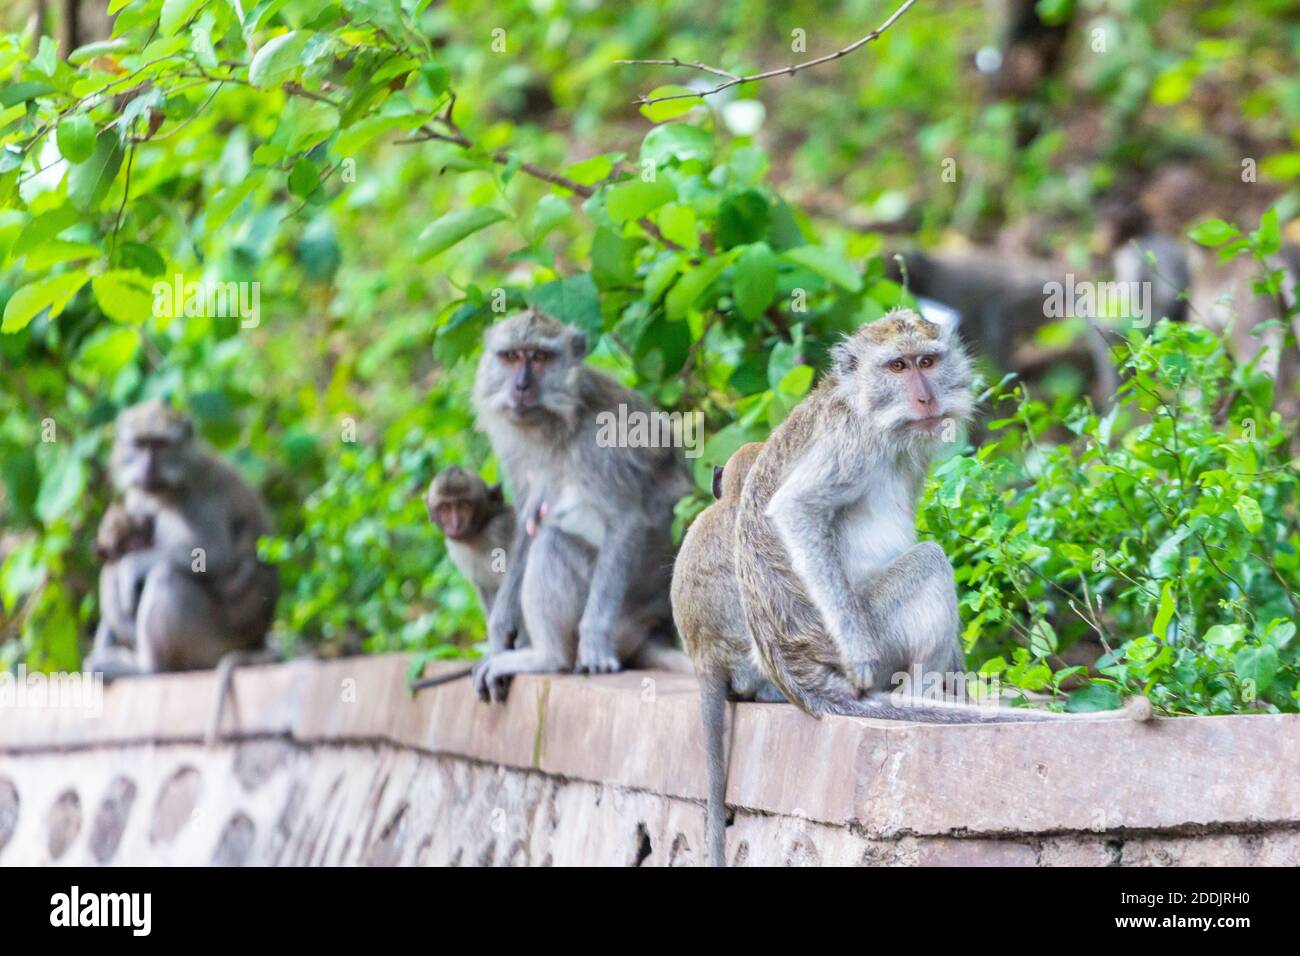 Long tailed macaques in Baluran National Park, Indonesia Stock Photo